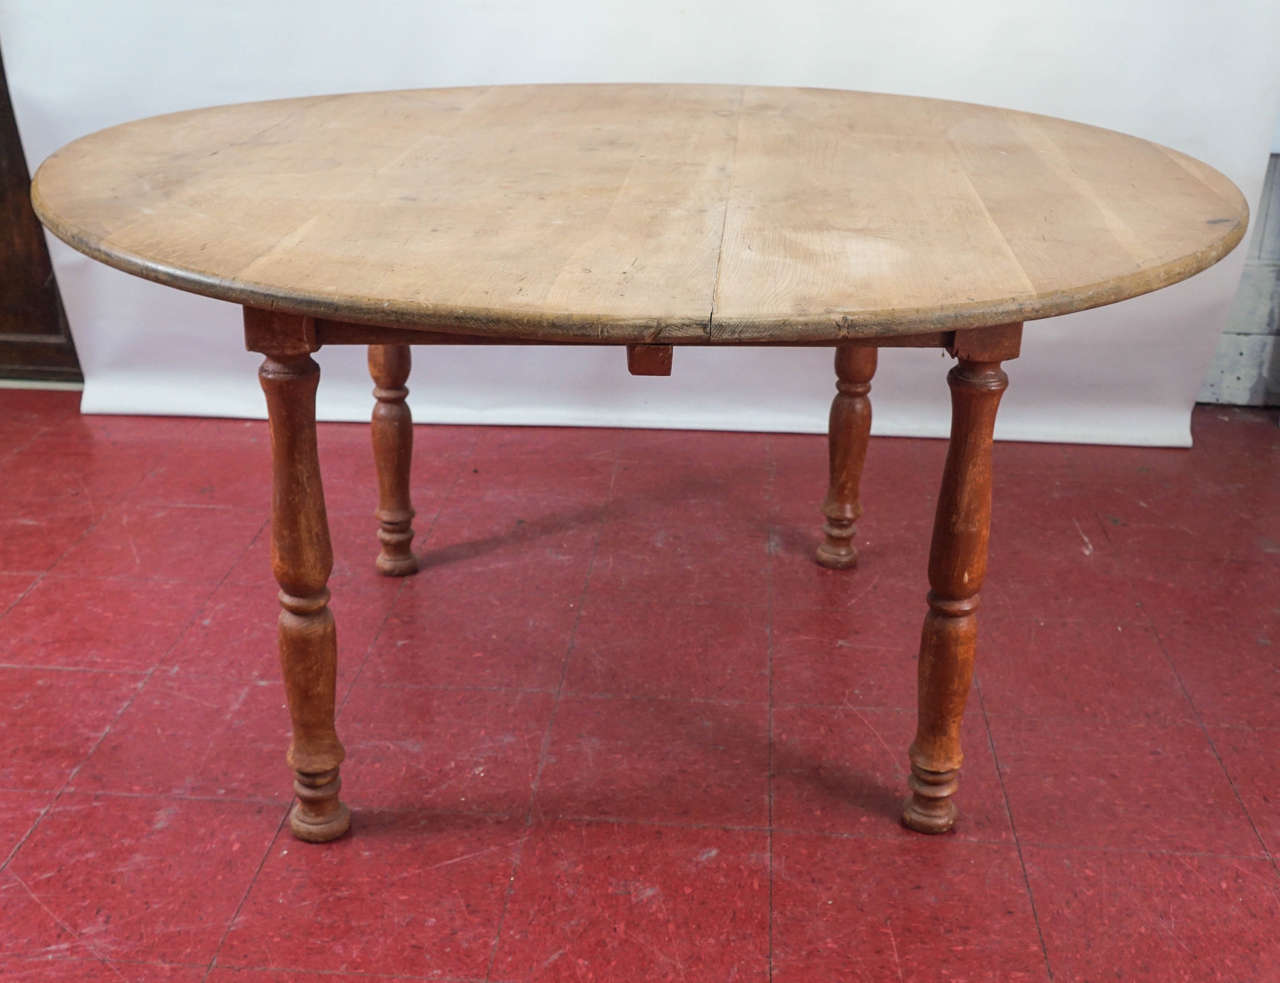 Round country farm dining table with a natural wood top and turned legs attached to a square base, this table will seat up to six or seven people. The base is painted red and has two permanent extensions that give added support to the